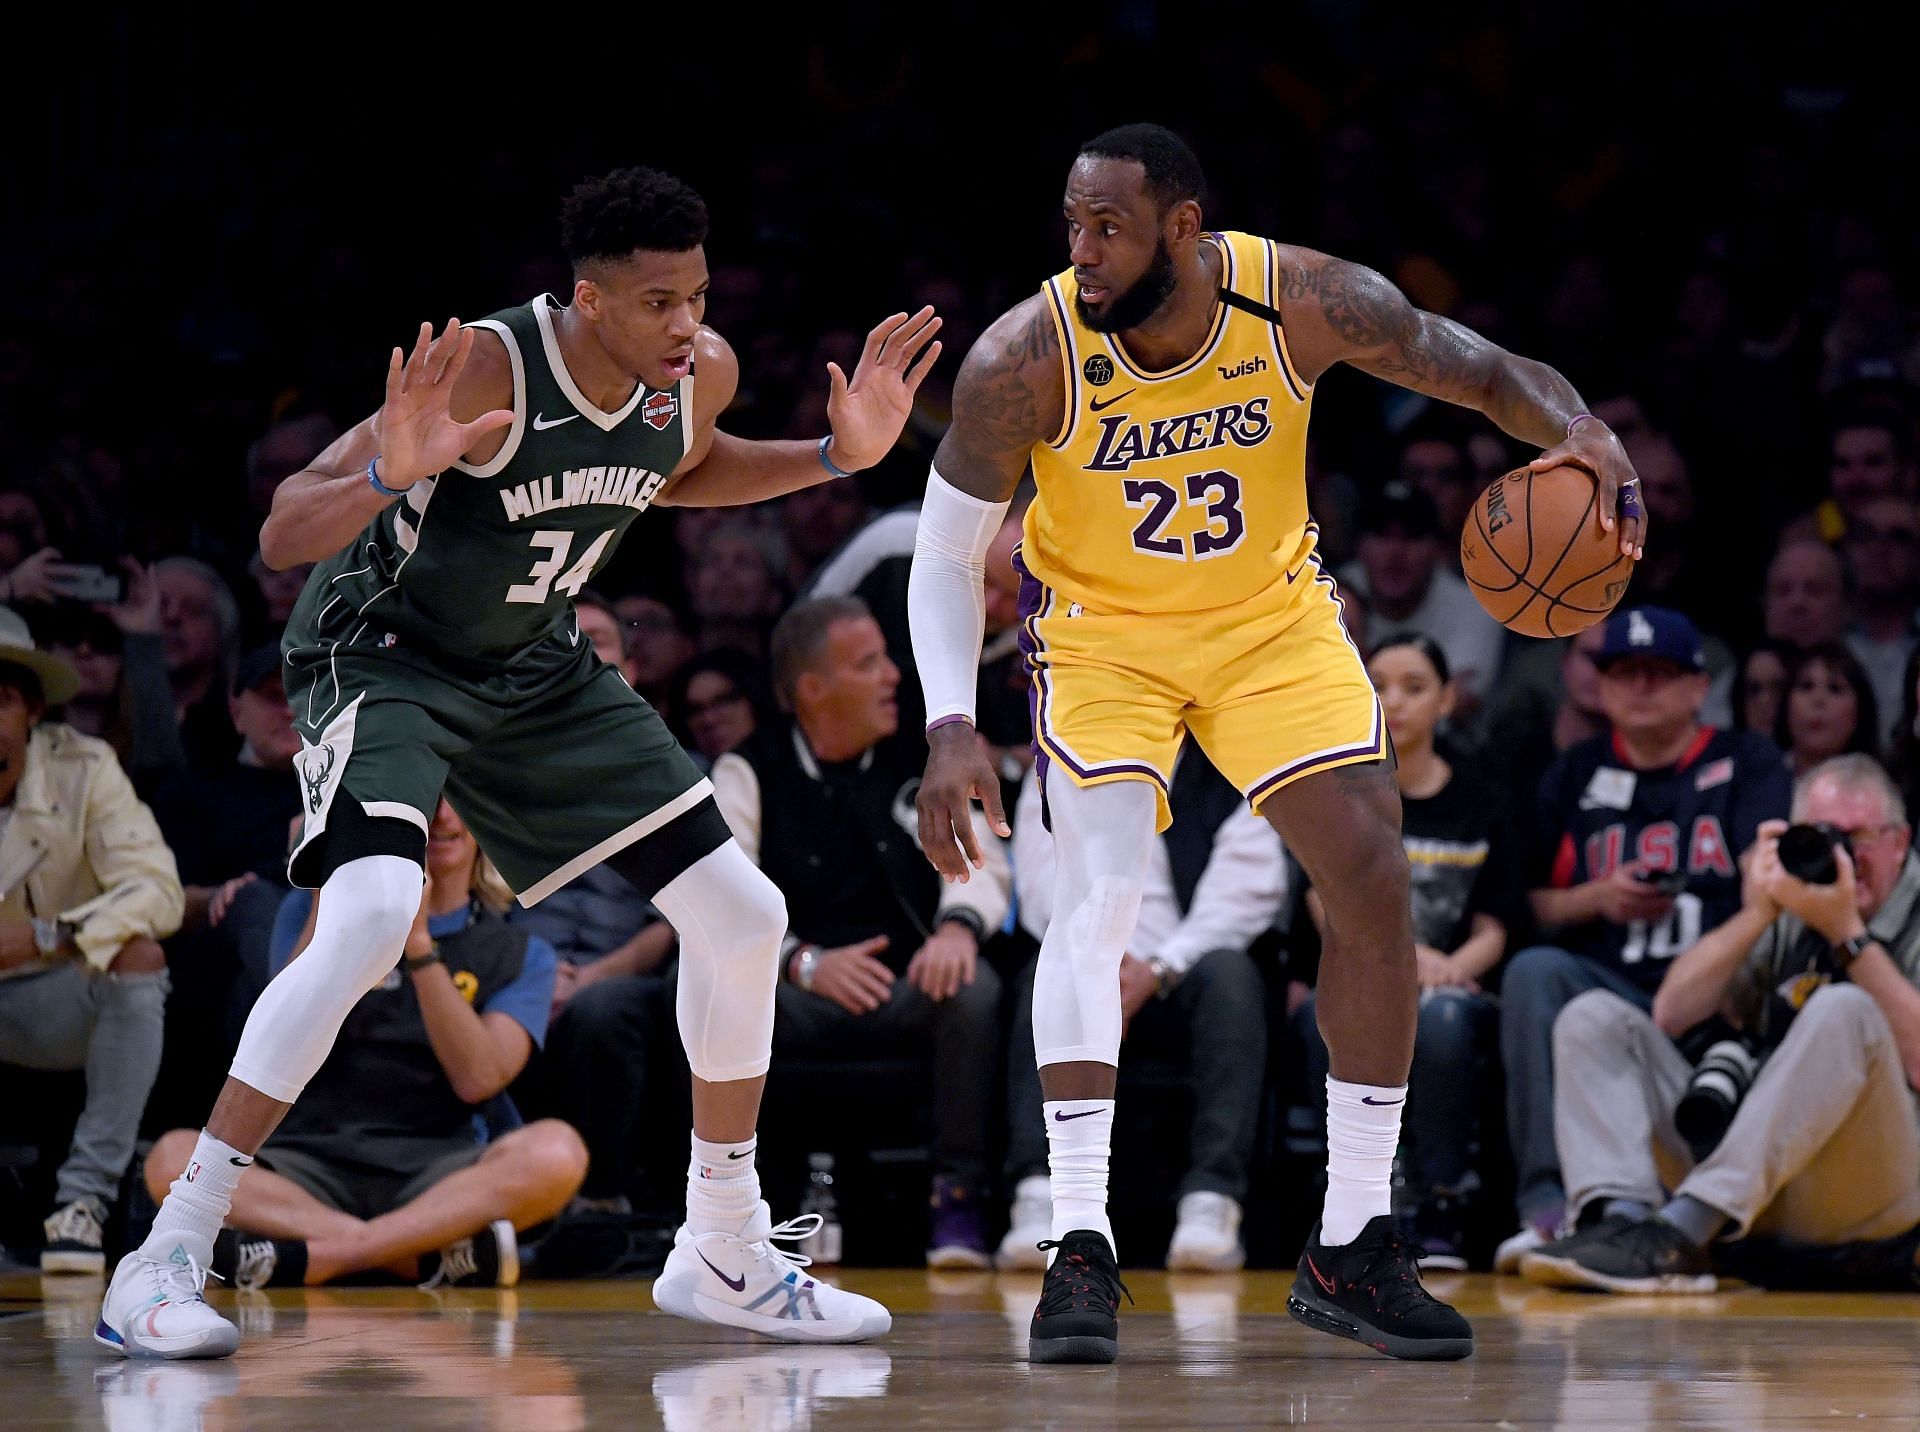 The LA Lakers suffered a 116-131 defeat to the Milwaukee Bucks on Tuesday night